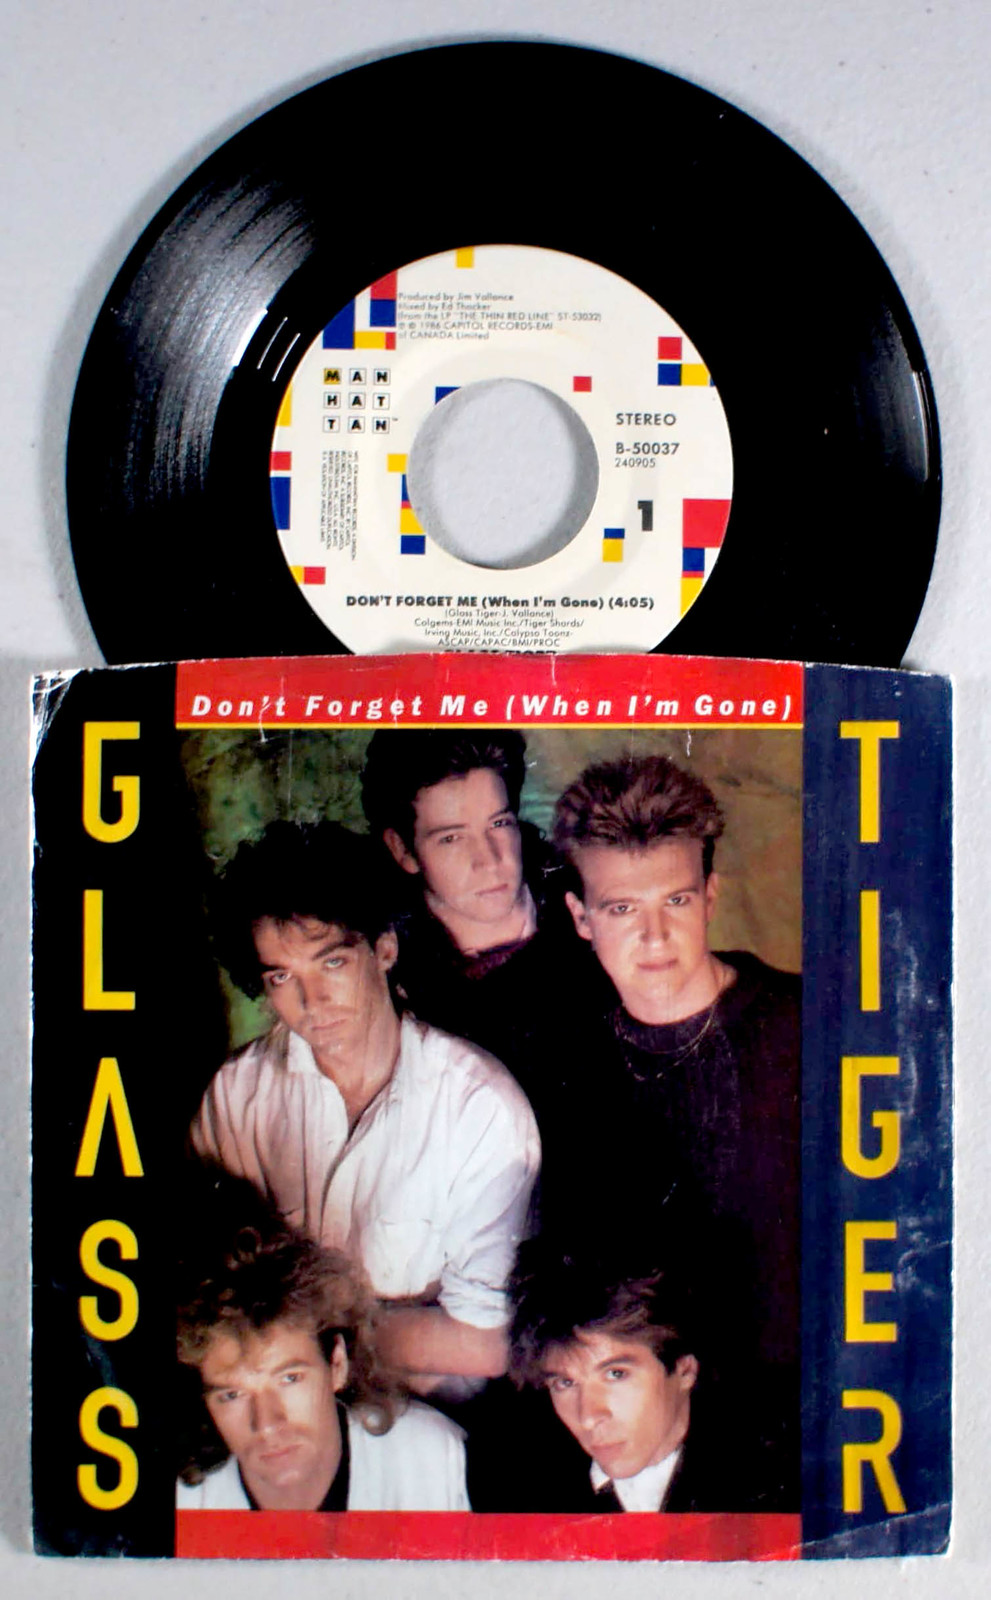 Primary image for Glass Tiger - Don't Forget Me (7" Single) (1986) Vinyl 45 • The Thin Red Line